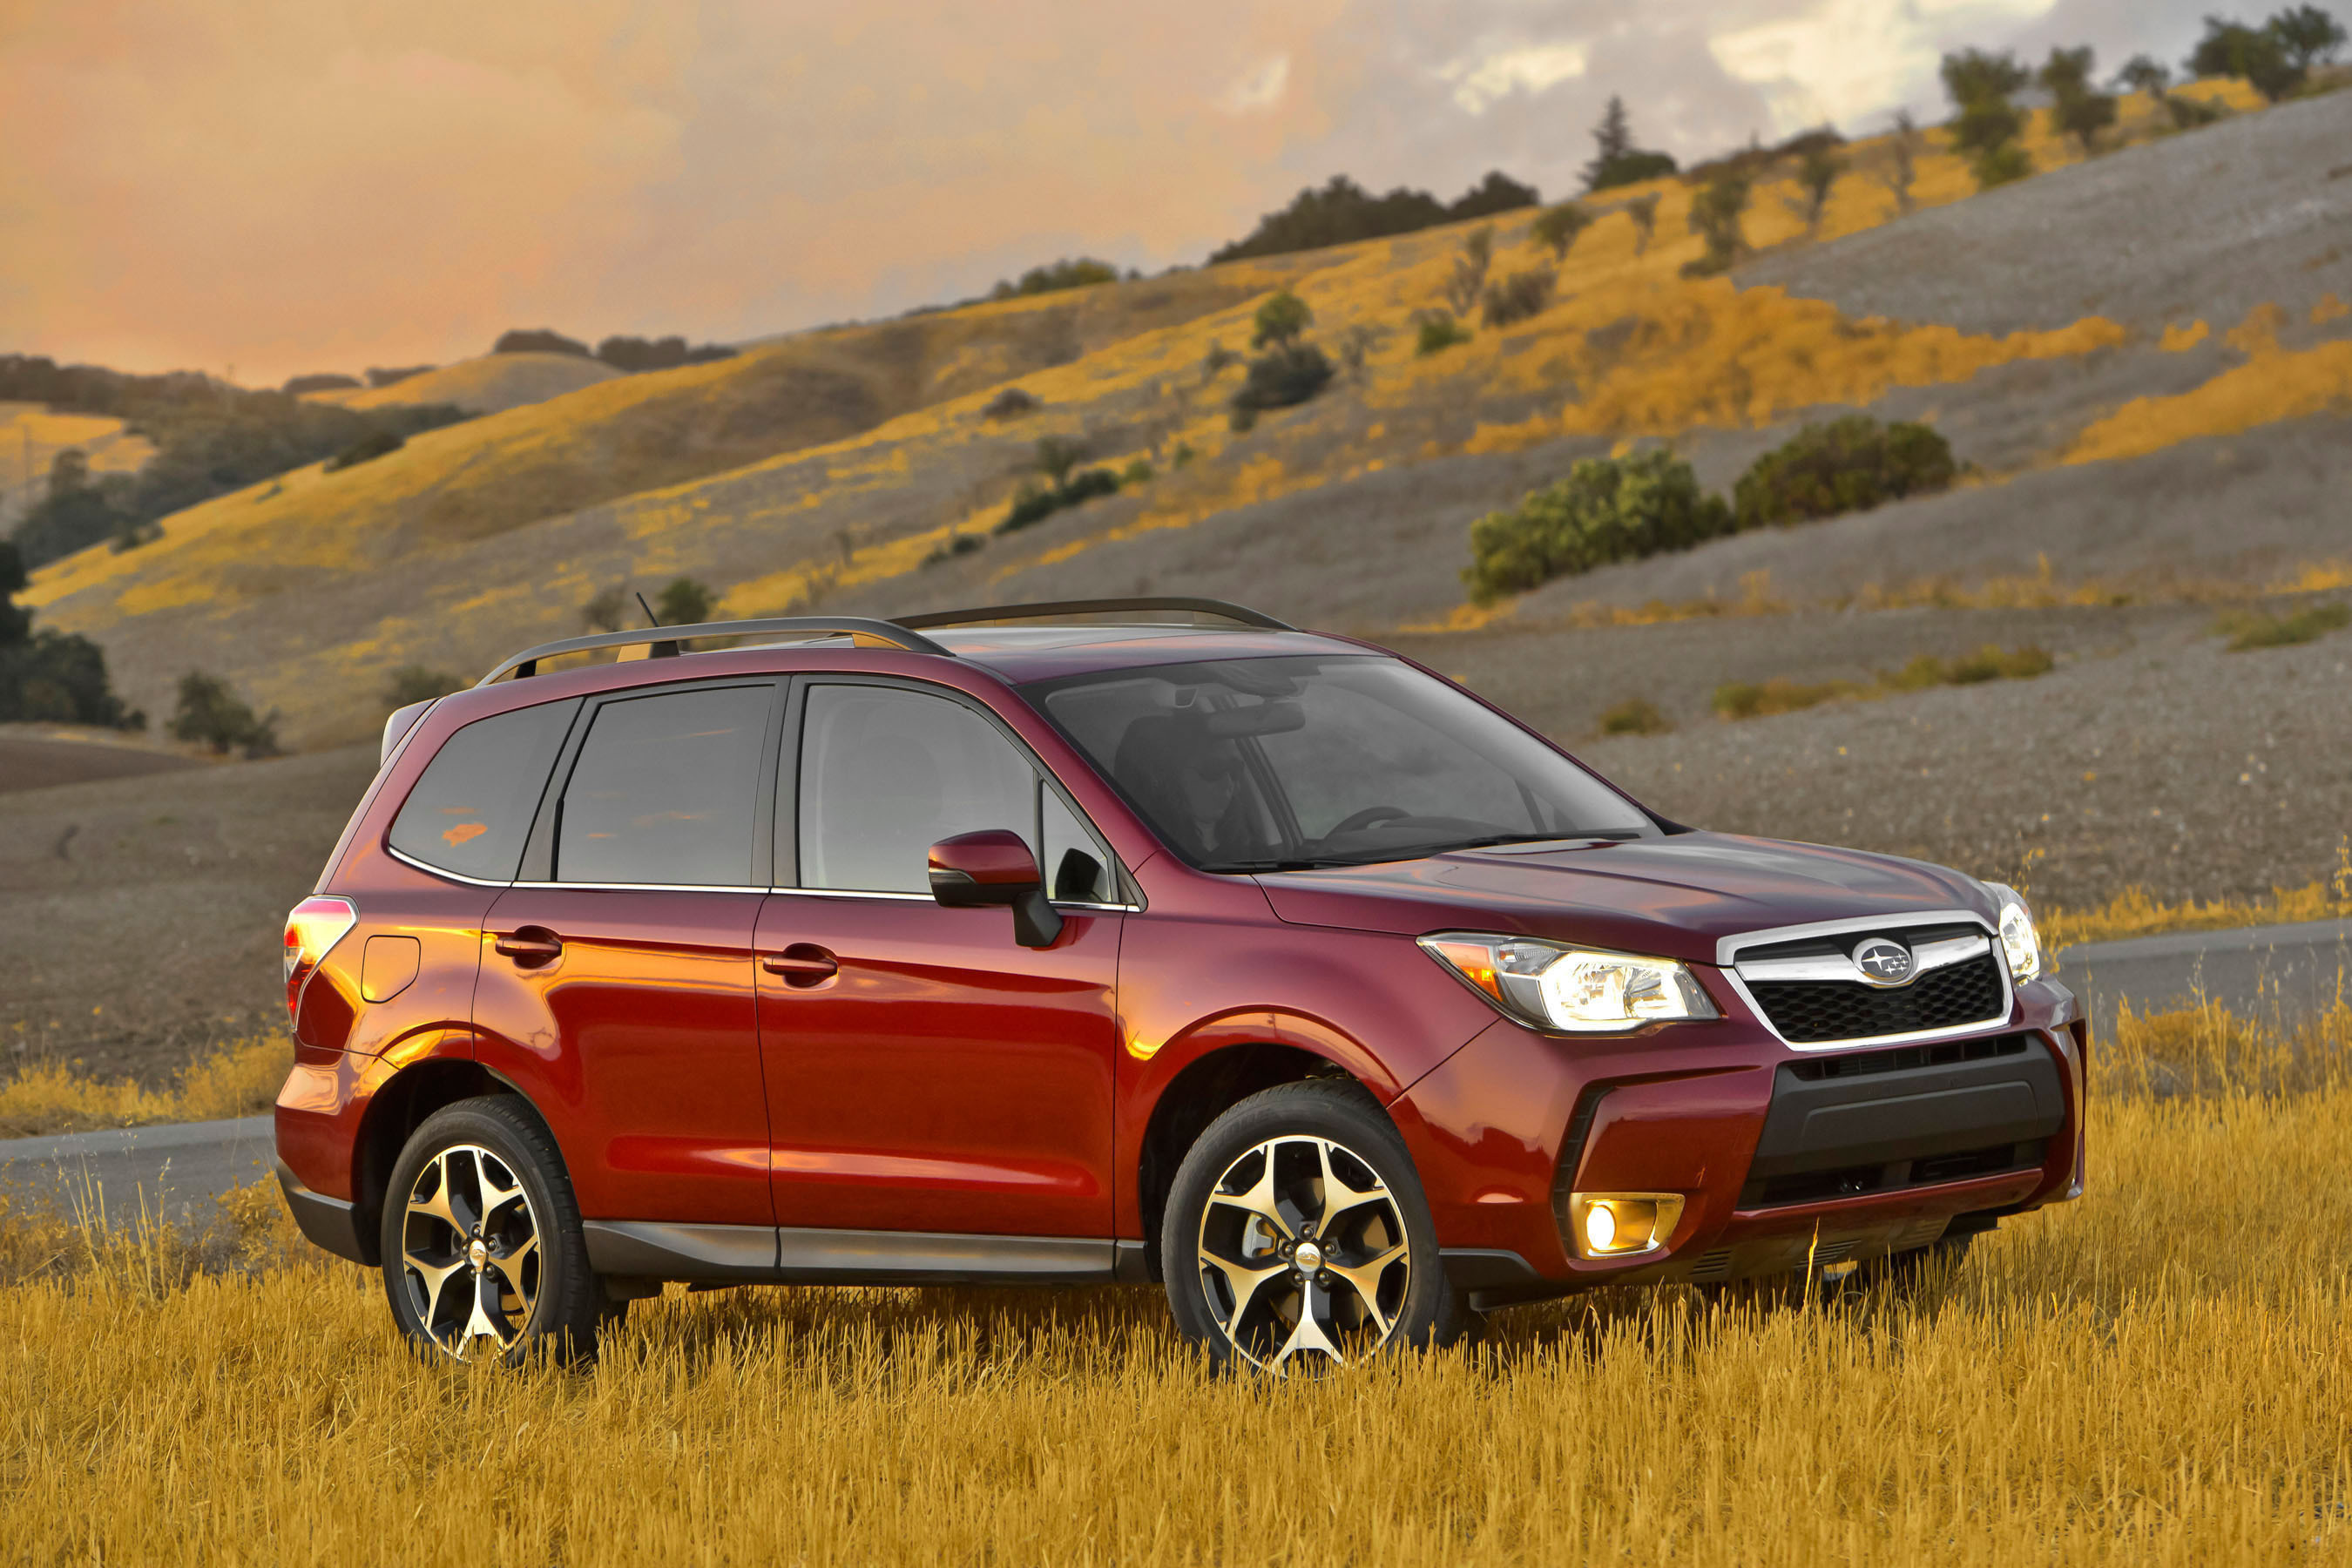 Subaru Announces Pricing For 2016 Forester®